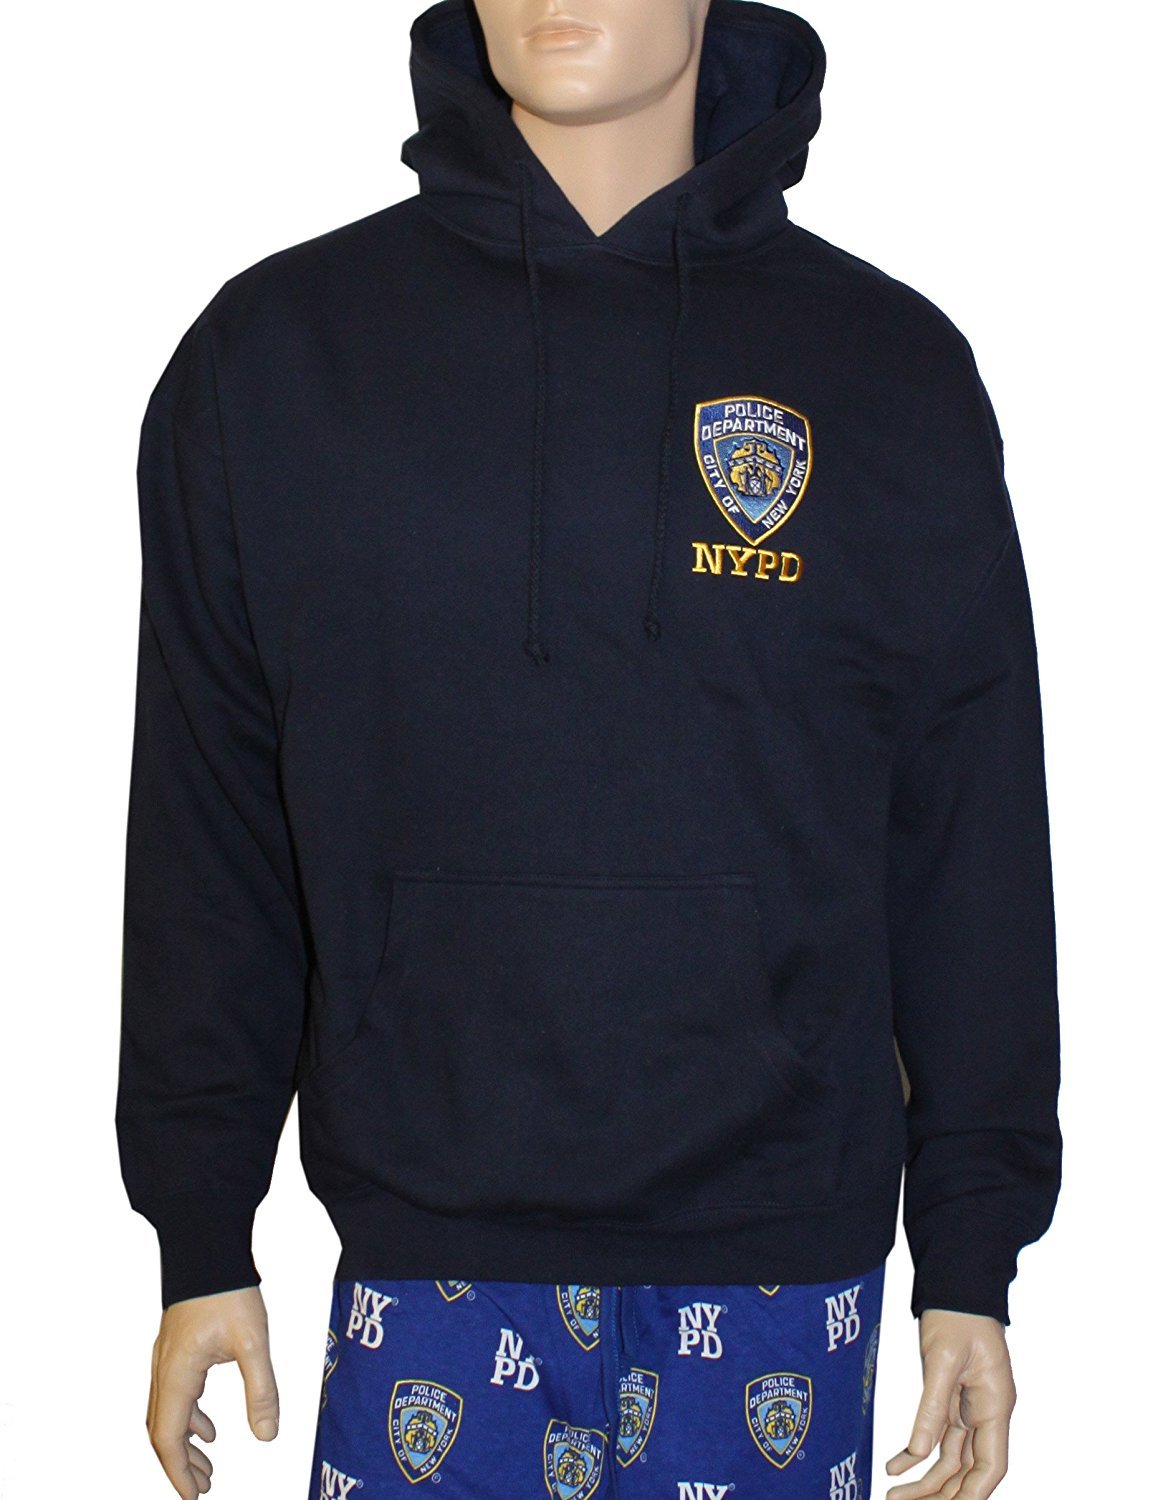 NYPD Embroidered Logo Hoodie Sweatshirt Navy Blue